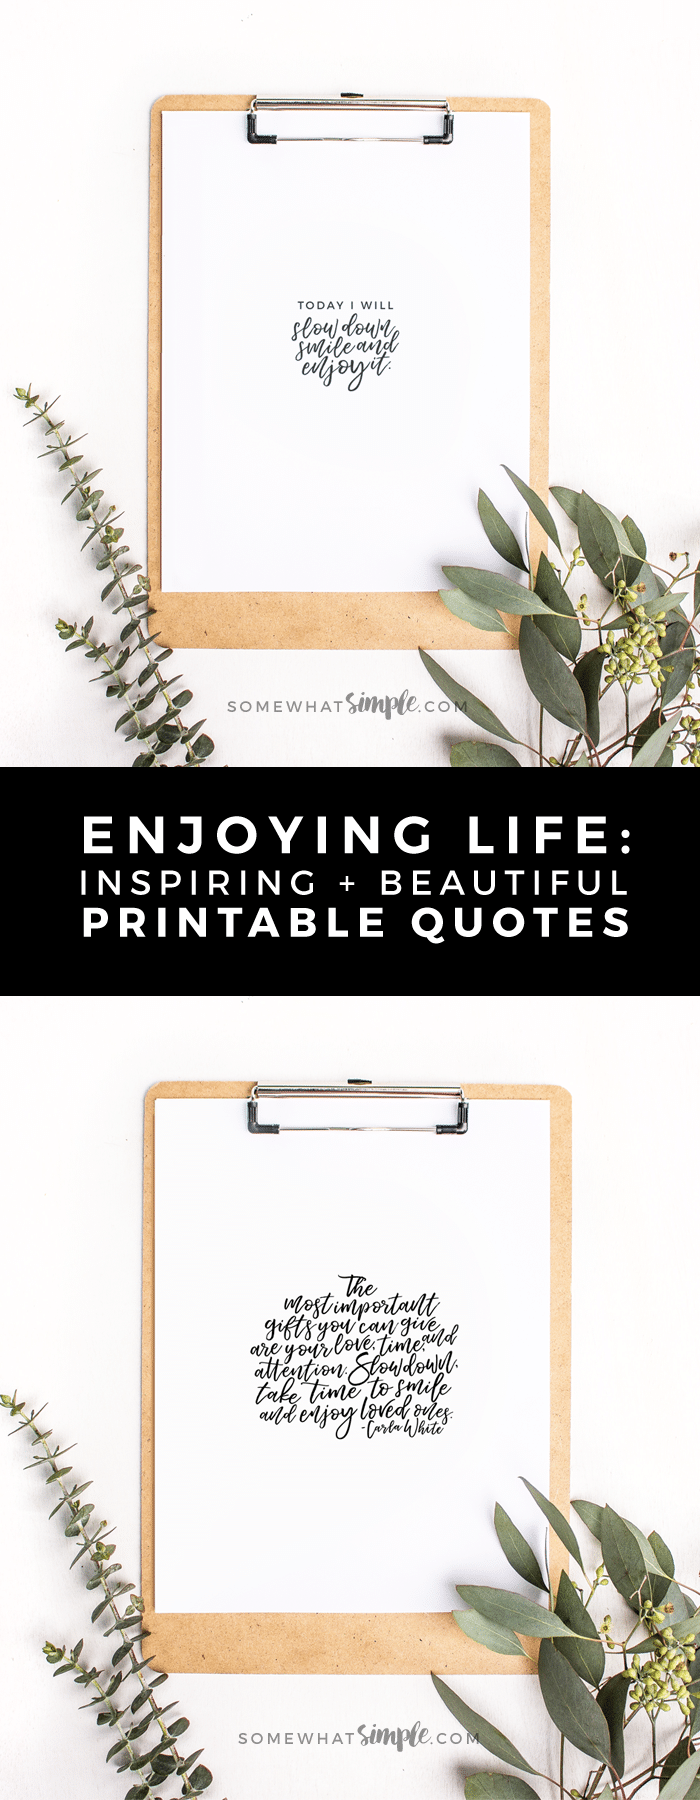 We love how beautiful and simple these printable inspirational quotes are! A great reminder that we can enjoy life, no matter the circumstances! Grab yours today! #inspirationalquotes #printable #inspirational #quotes via @somewhatsimple